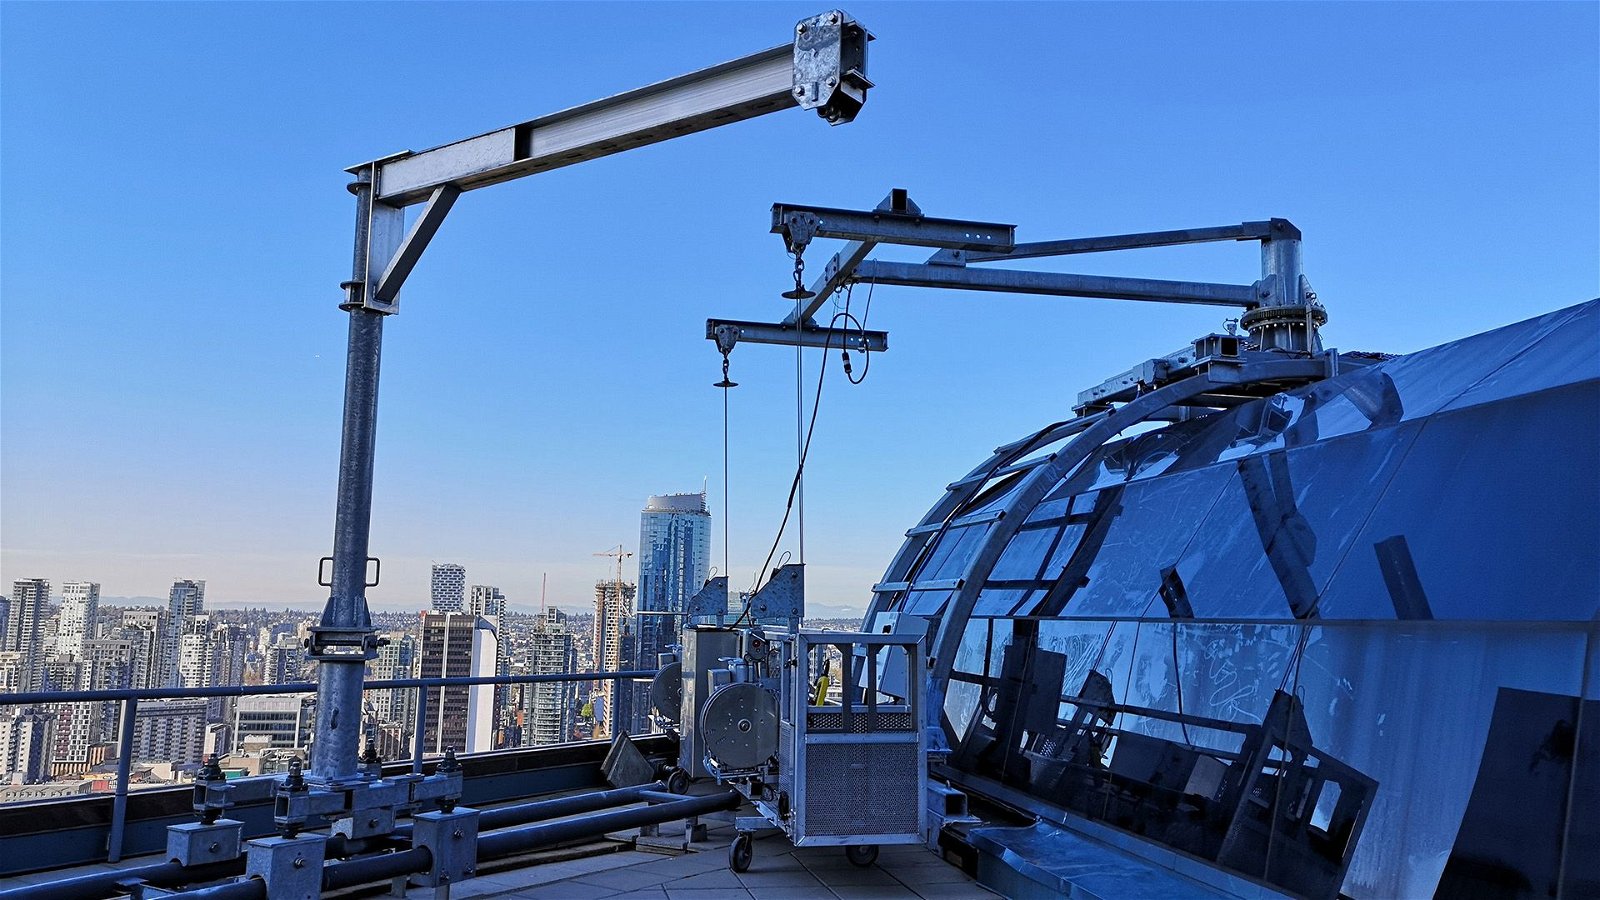 Fall Protection & Maintenance Access Systems